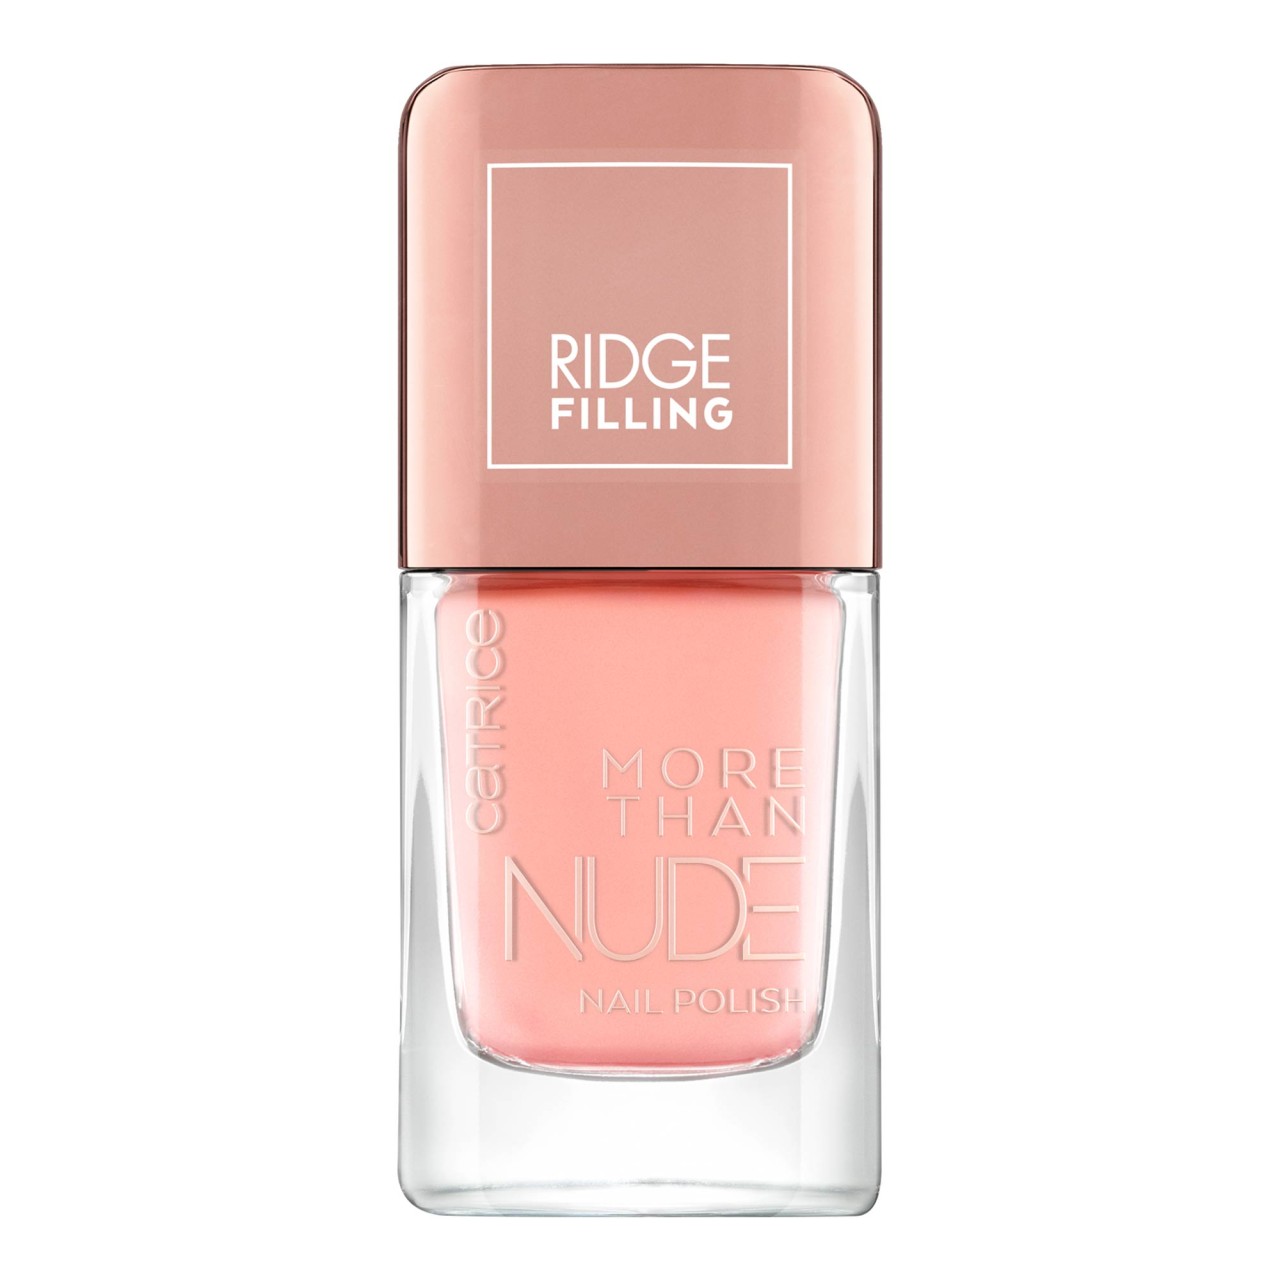 CATRICE - Nail Polish More Than Nude -  Peach For Stars